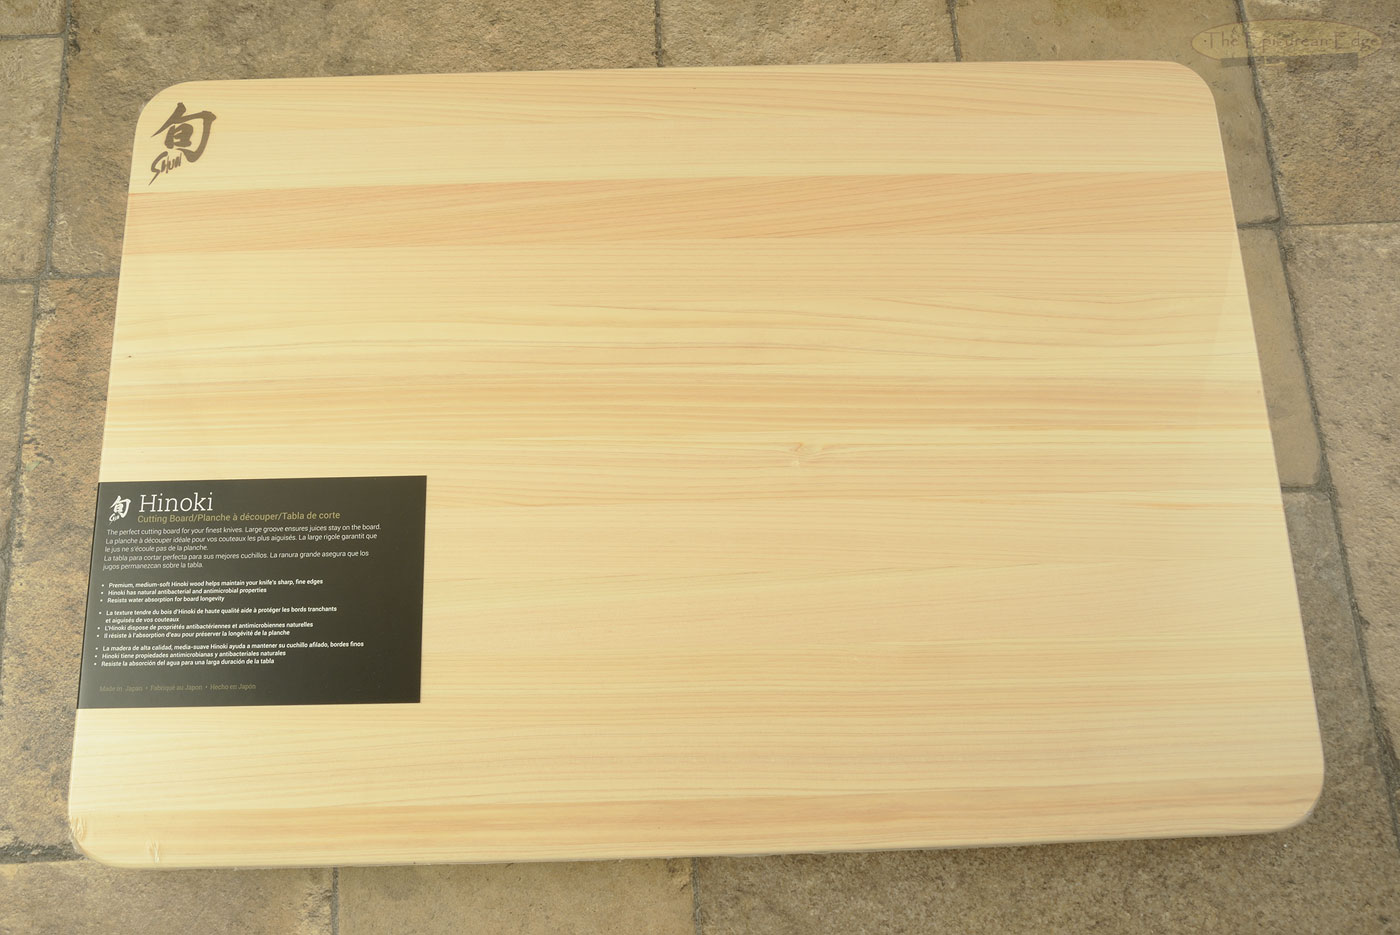 Extra Large Hinoki Cutting Board with Juice Groove (19-3/4 in x 14 in x 1 in) - DM0819